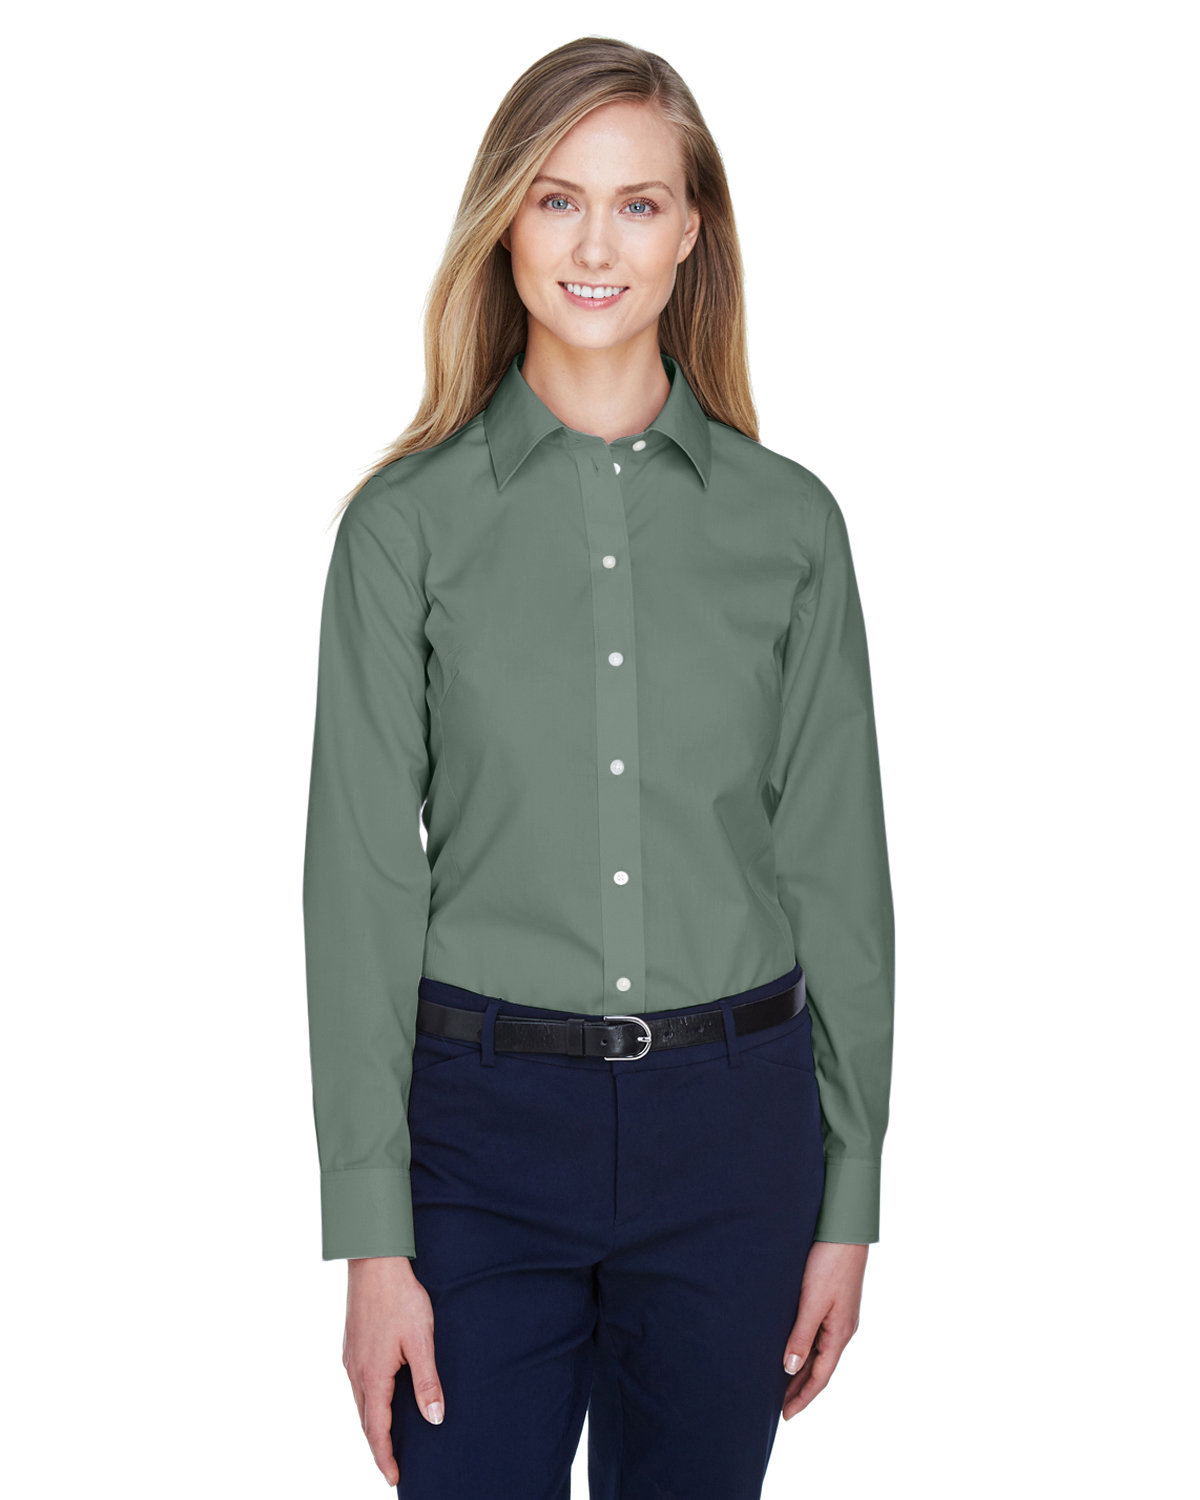 Devon & Jones Ladies' Crown Woven Collection™ Solid Broadcloth DILL 